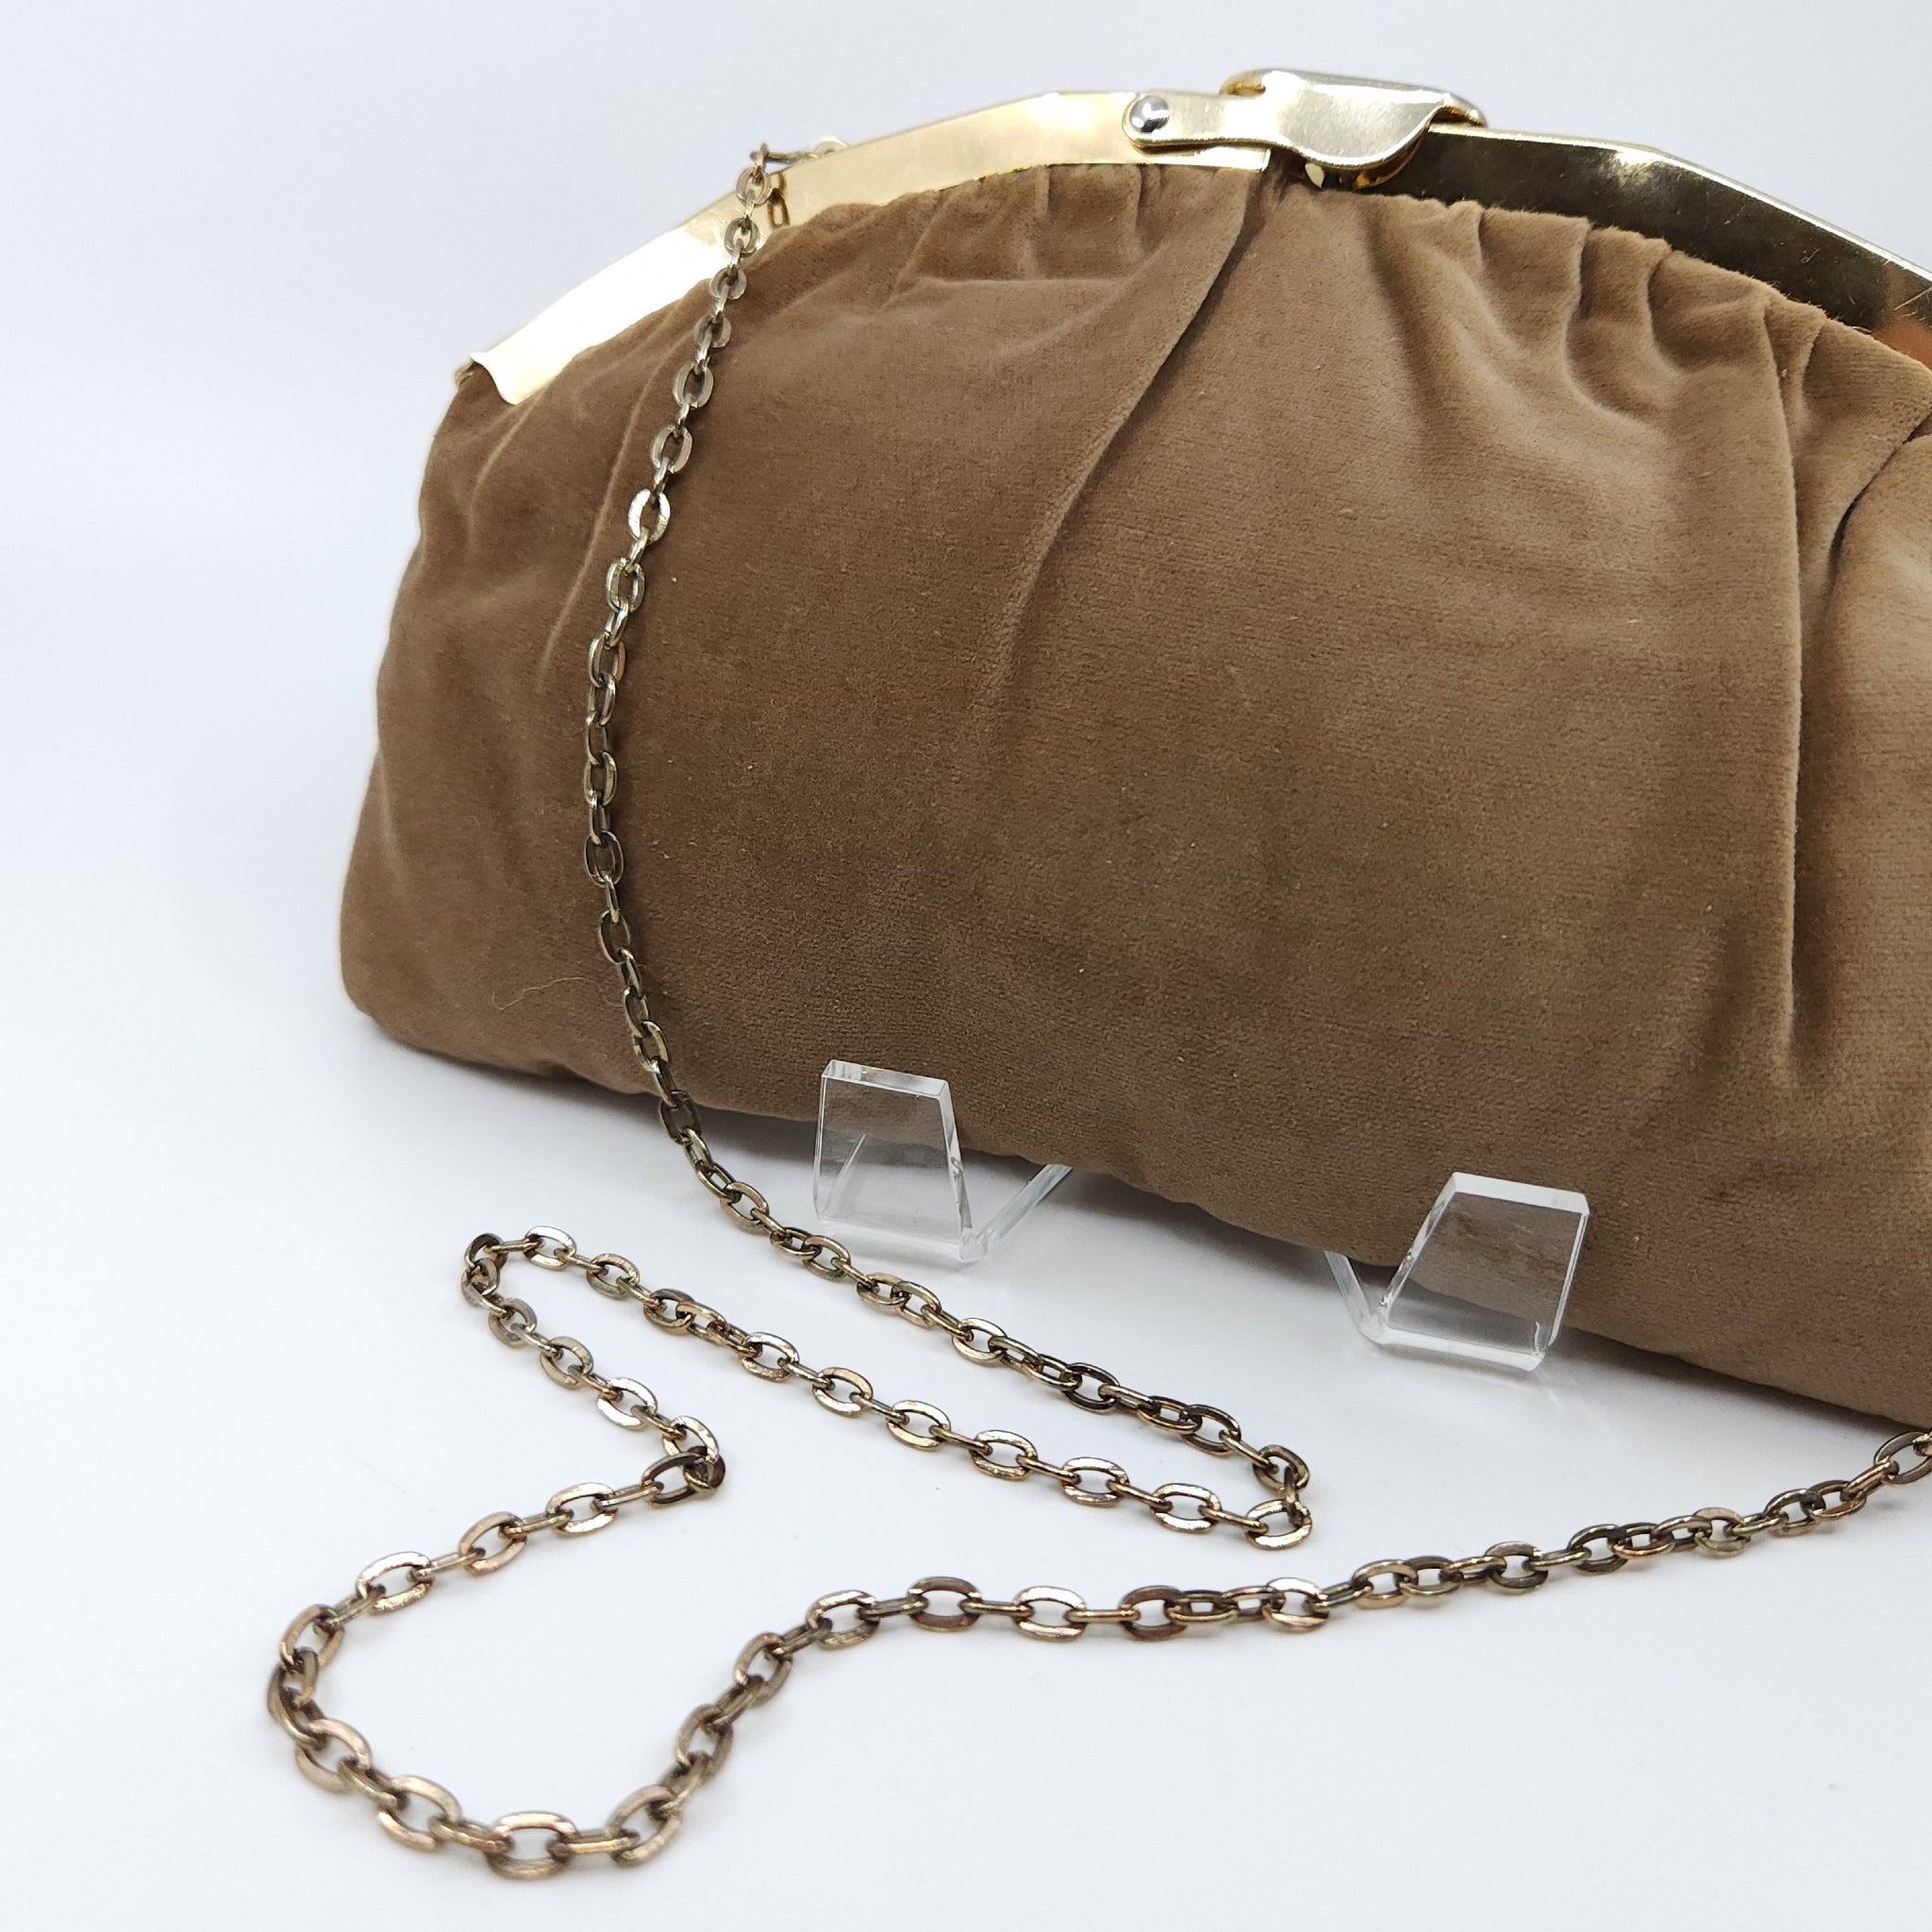 Vintage Toffee Velvet Clutch with Chain Strap